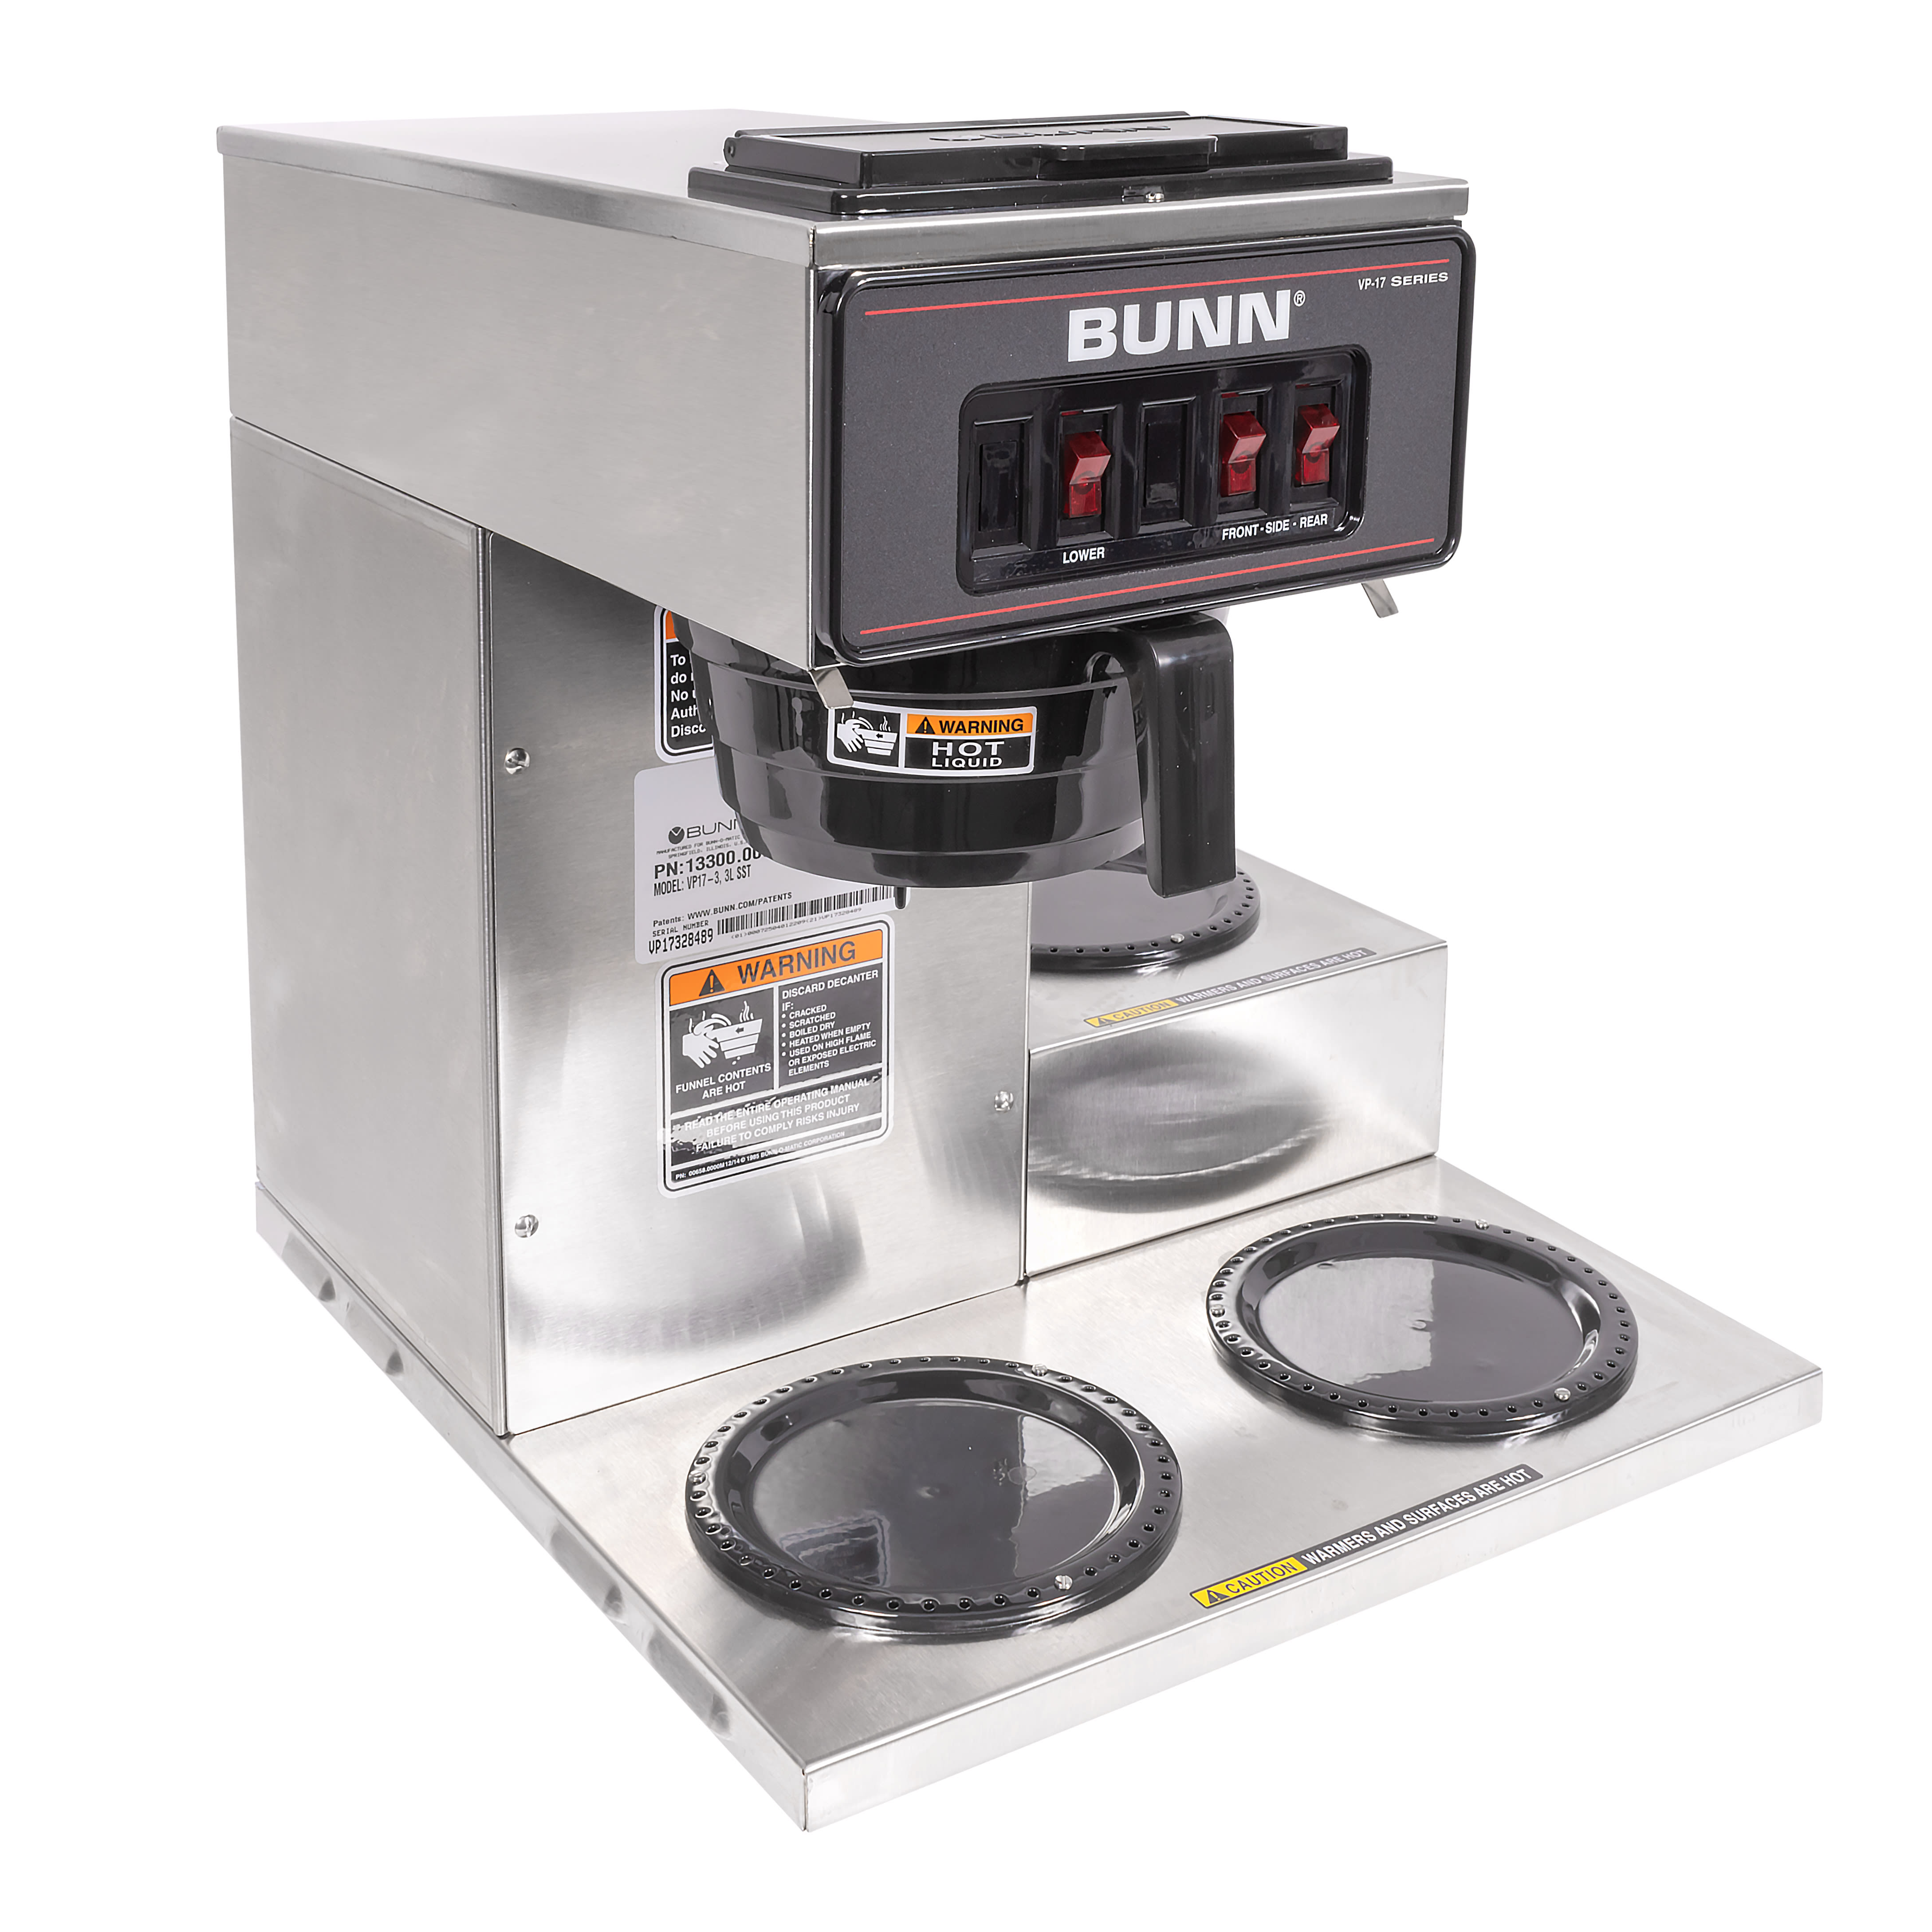 Bunn VP17-3 Pourover Coffee Brewer 3 Lower Warmers Stainless